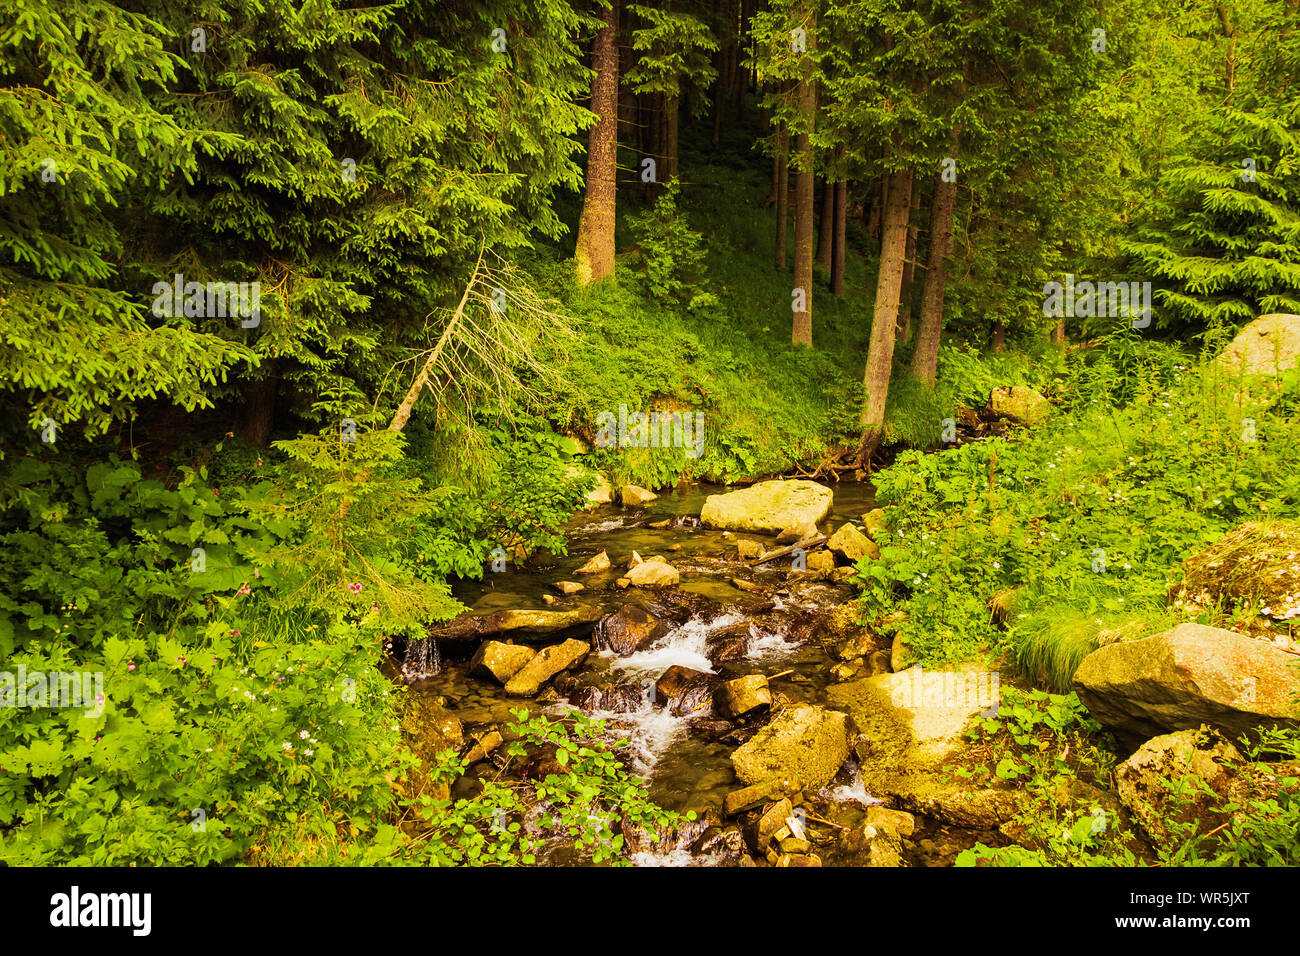 The source of the Prut River in the Carpathian Mountains. Tourist route to Mount Hoverla. Beautiful summer landscape Stock Photo